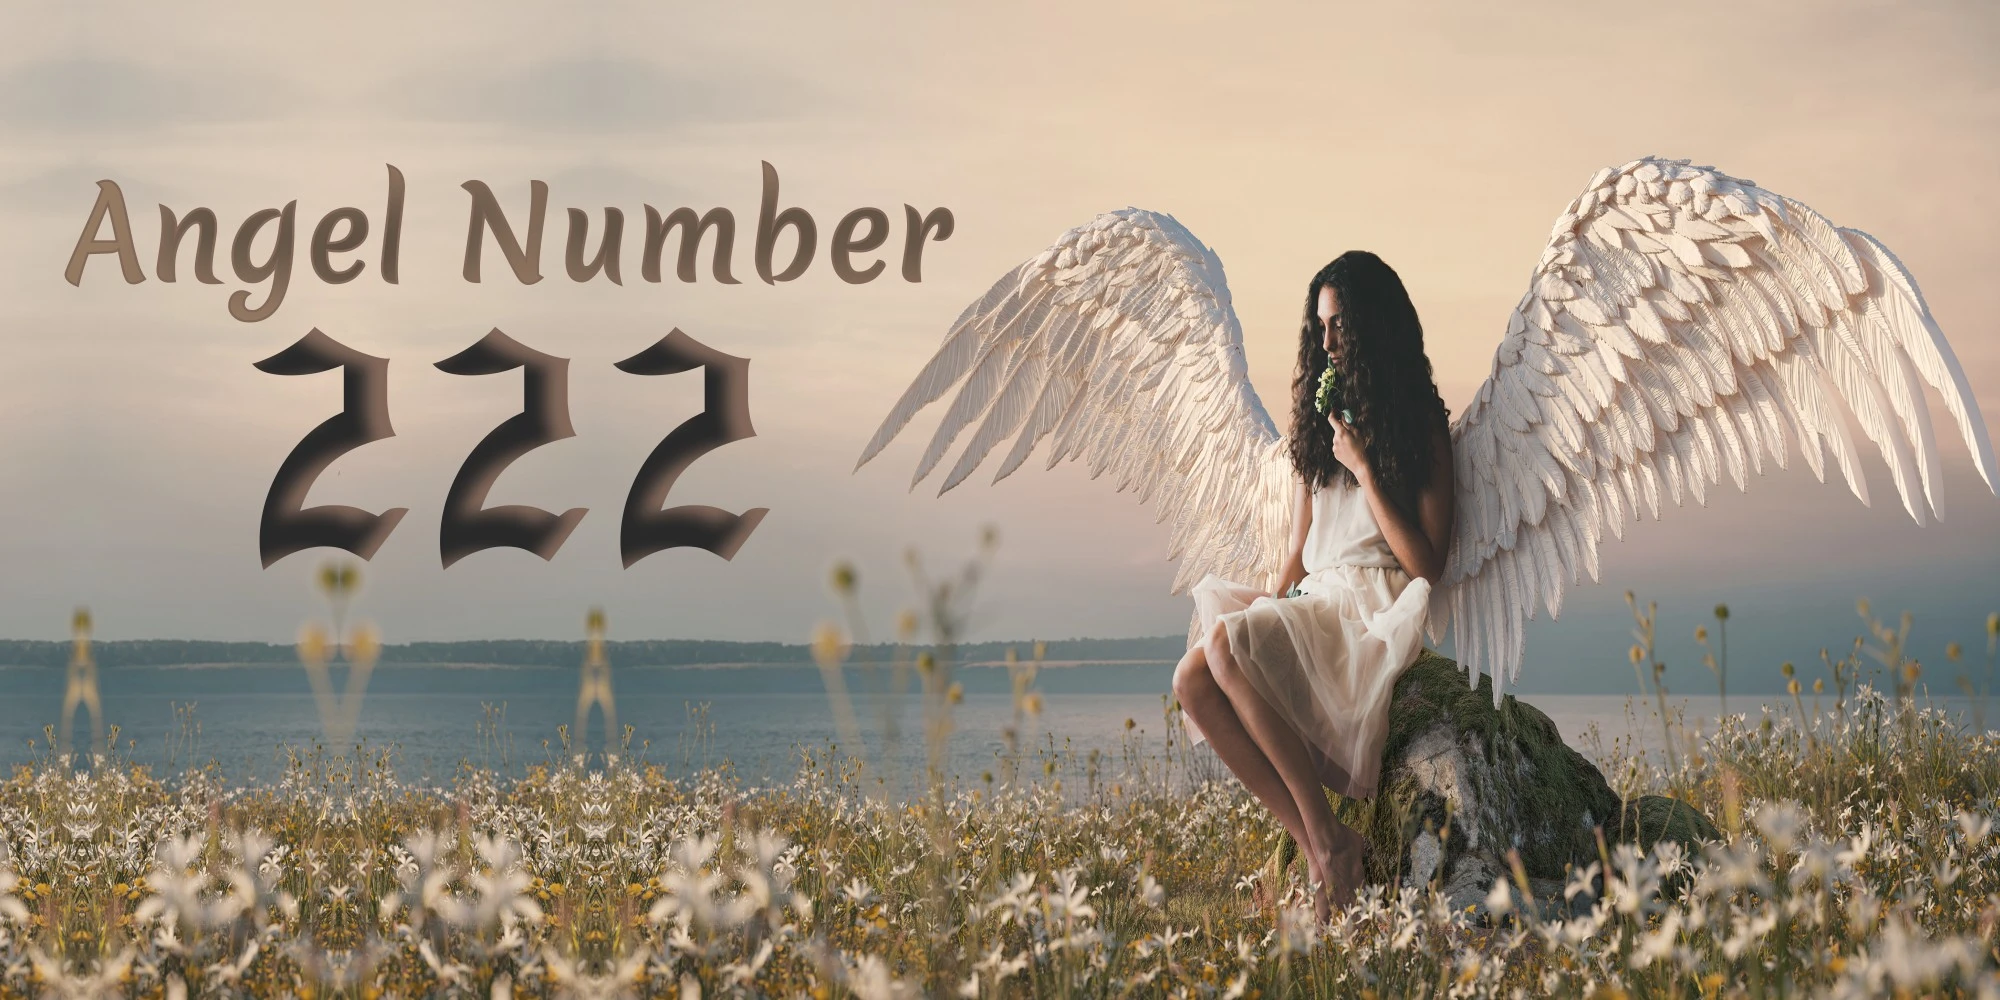 The 222 Angel Number Meaning & symbolism in your life, love, Twin Flame and Money.